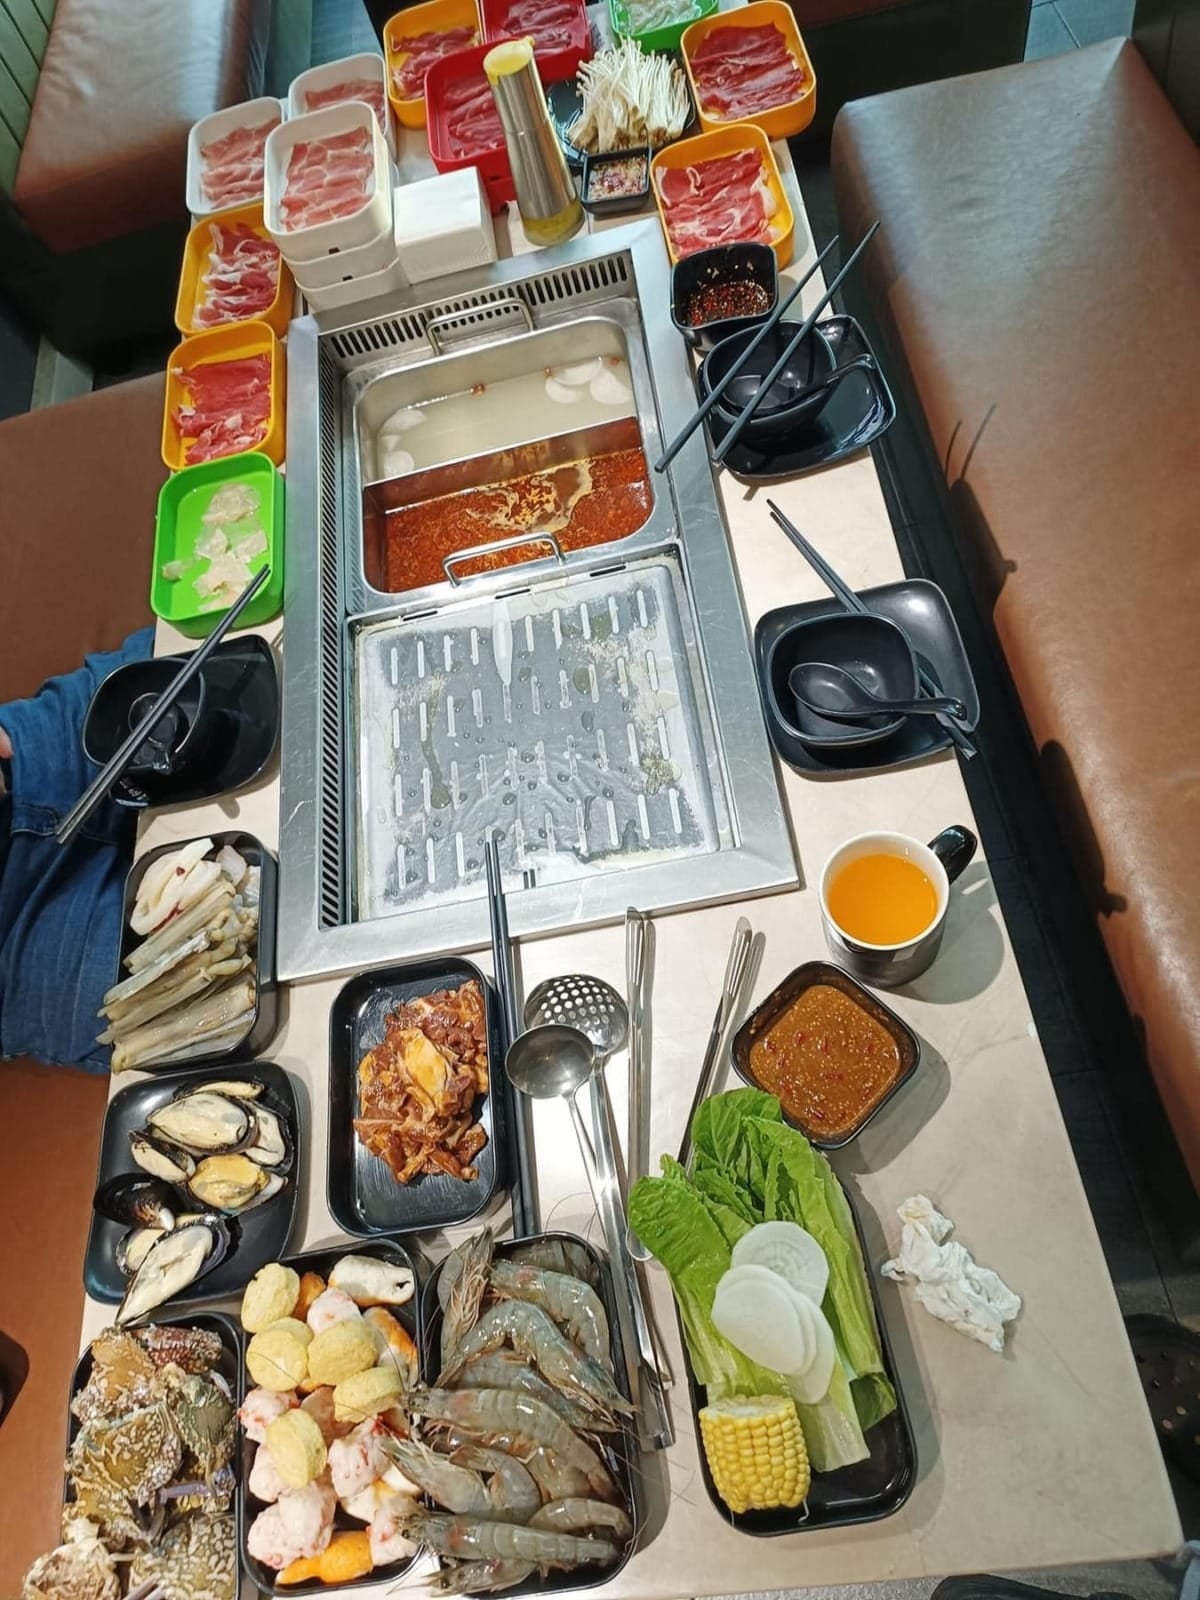 steamboat meat plates 火锅肉片吃到饱 2 scaled